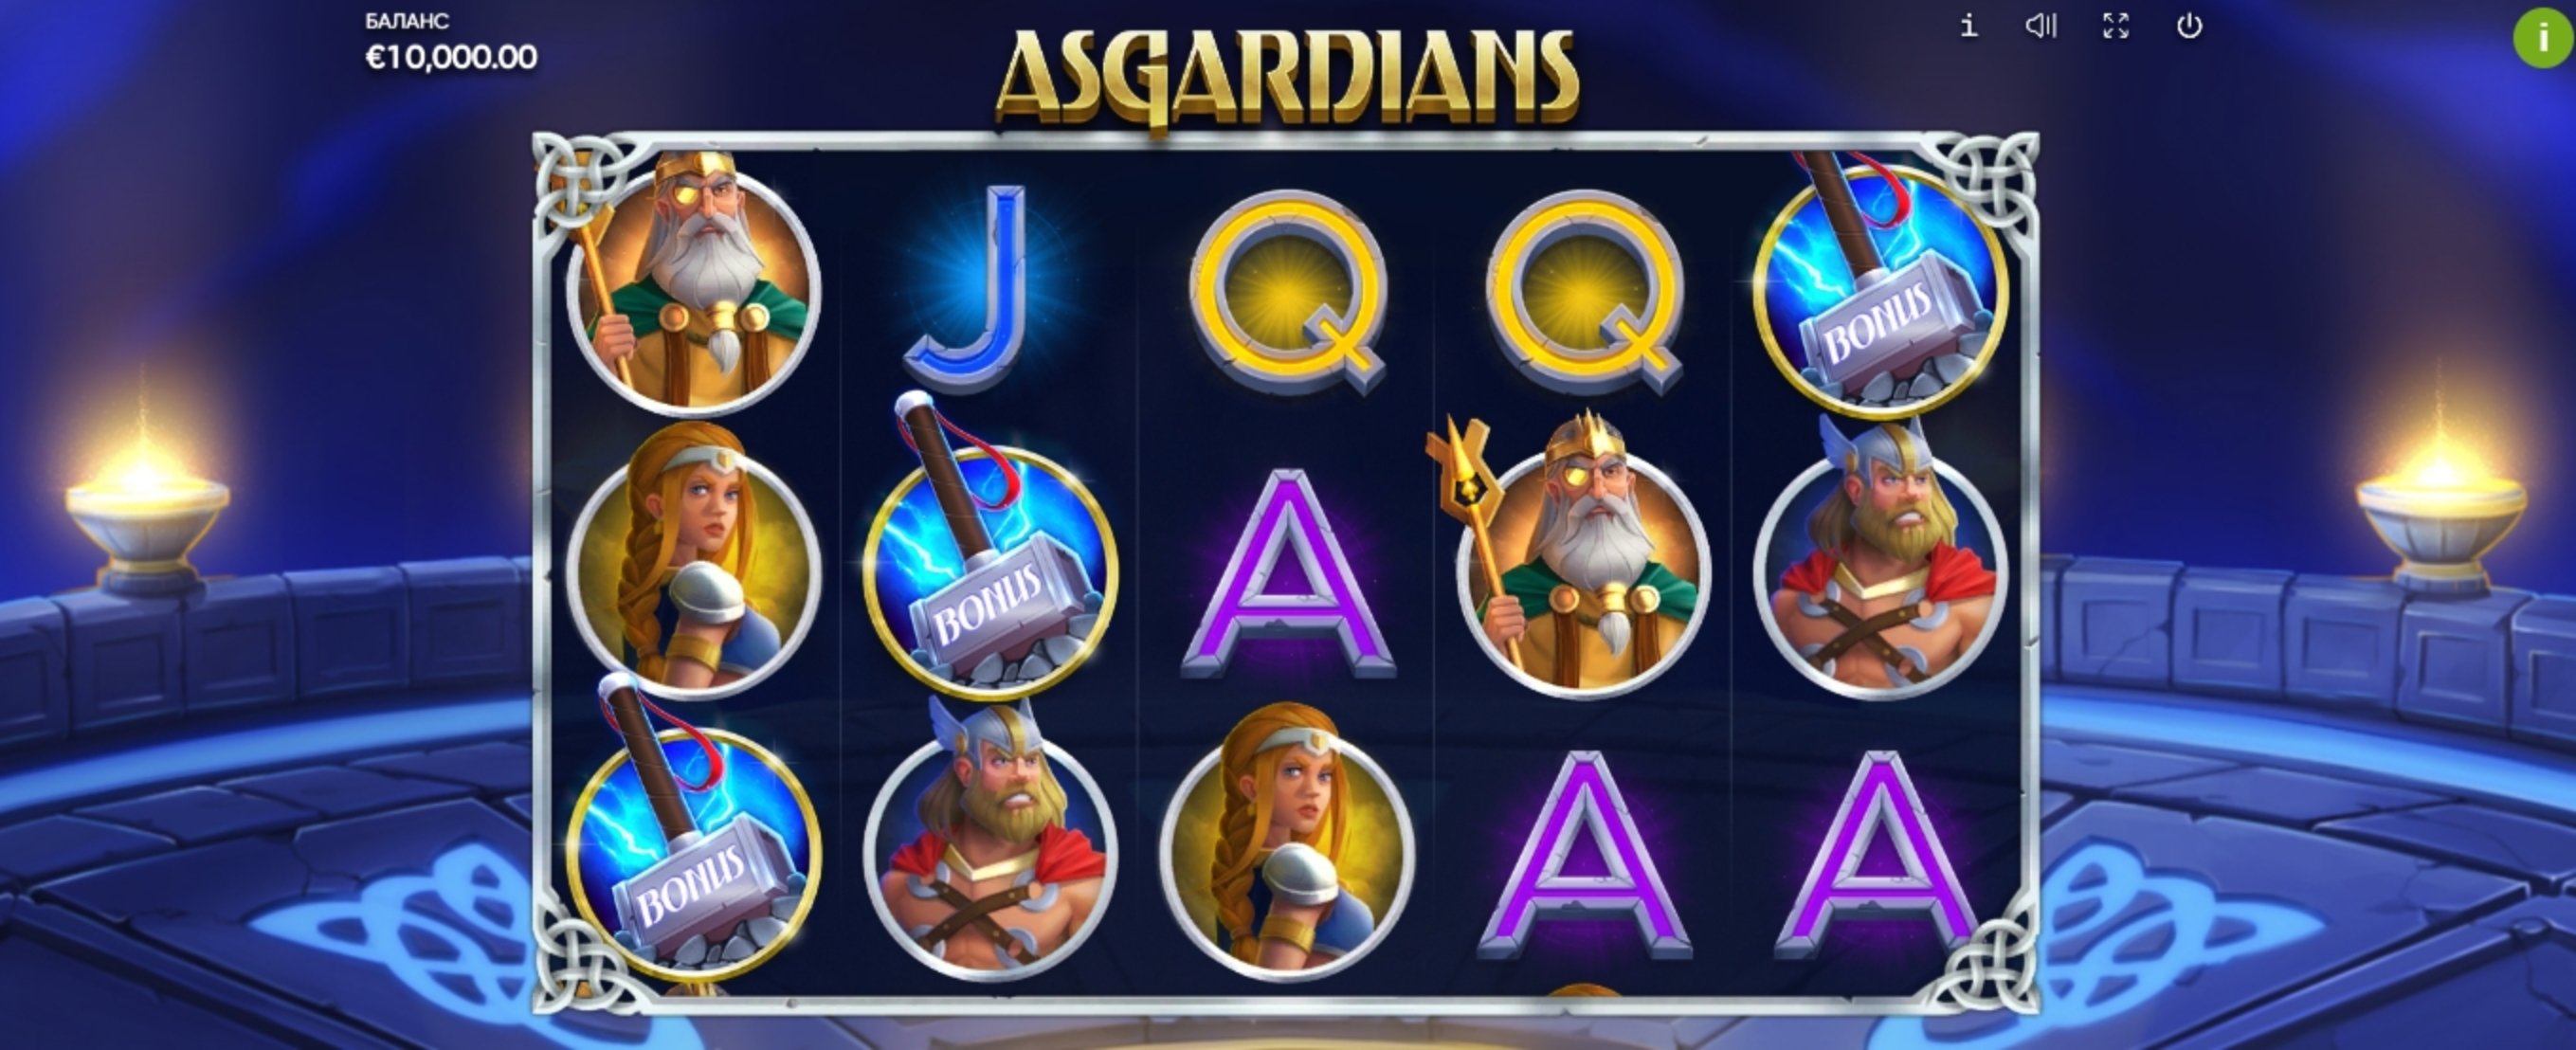 Reels in Asgardians Slot Game by Endorphina